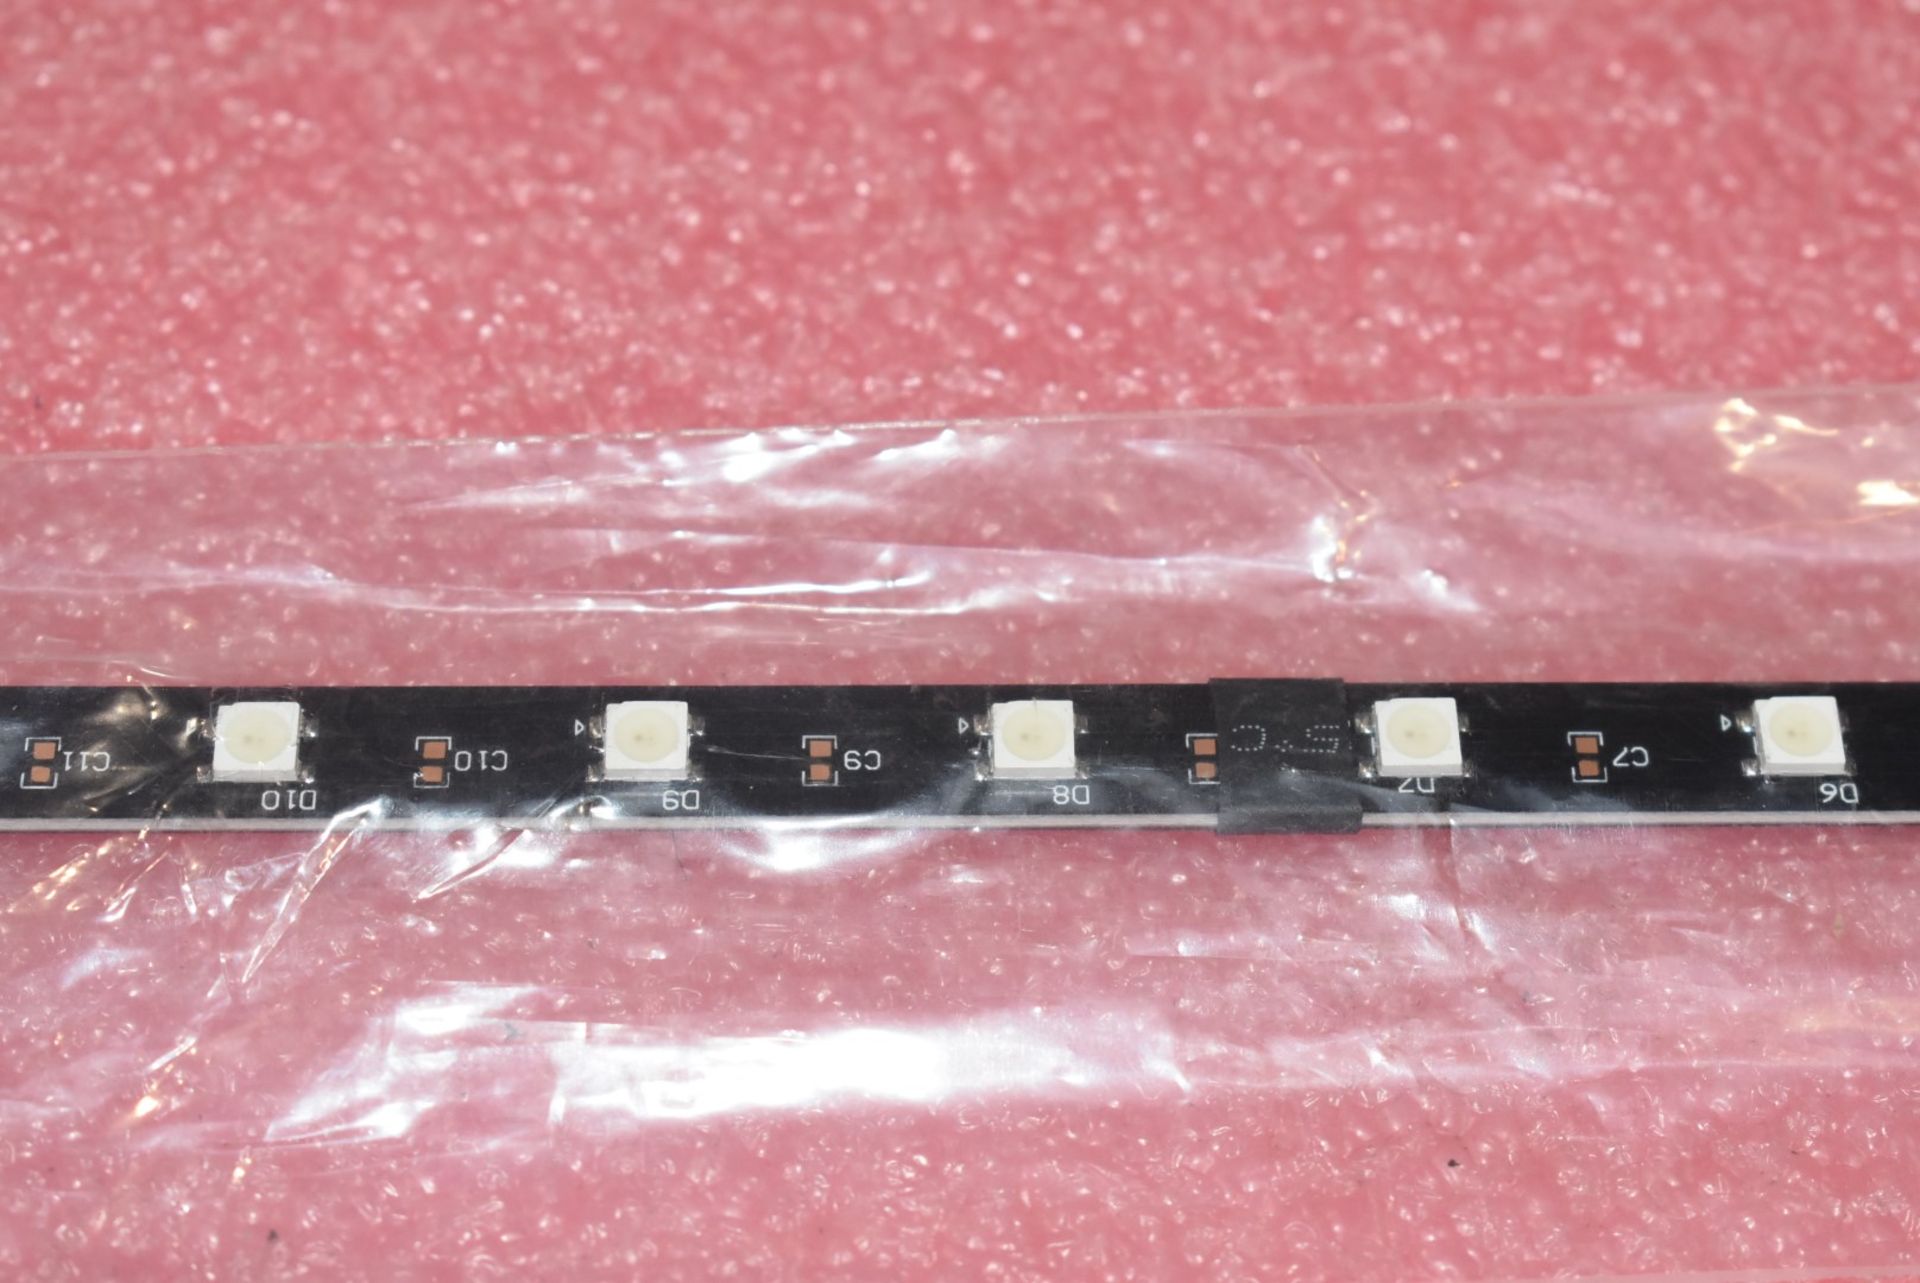 50 x ARGB Raider LED Strips For Computer Cases - 30cm Length With 3 Pin Connectors - Image 4 of 5